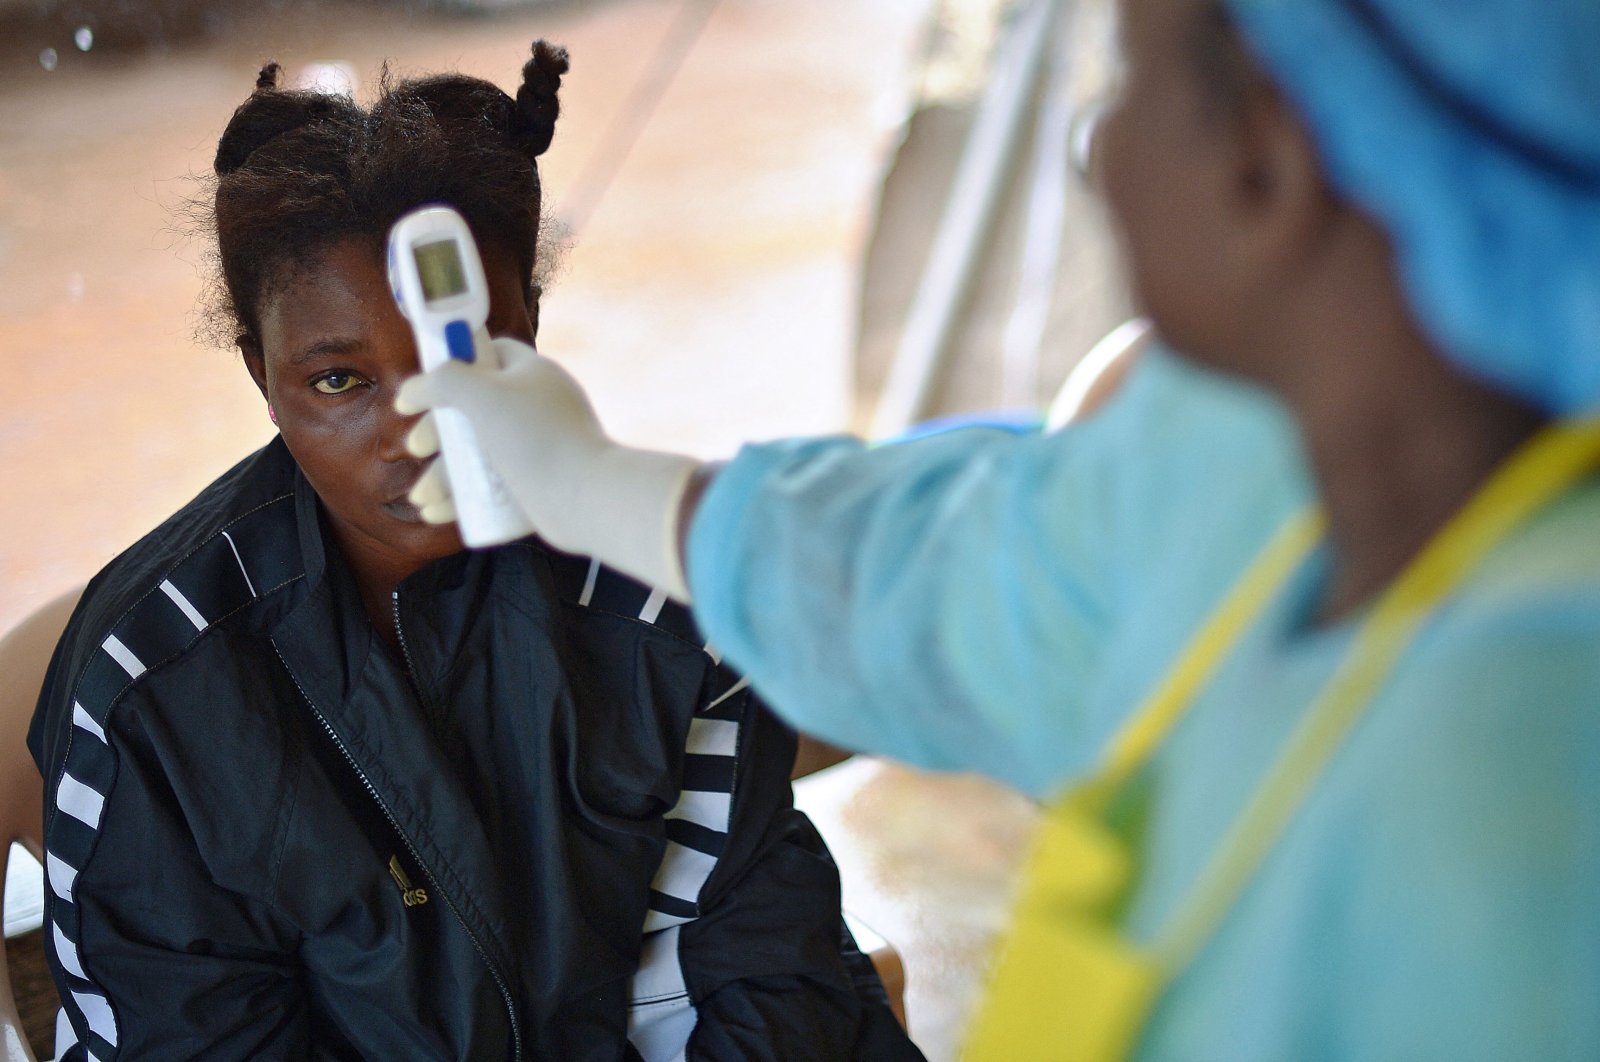 A girl suspected of being infected with the Ebola virus has her temperature checked at the government hospital in Kenema, Sierra Leone, Aug. 16, 2014. (AFP Photo)